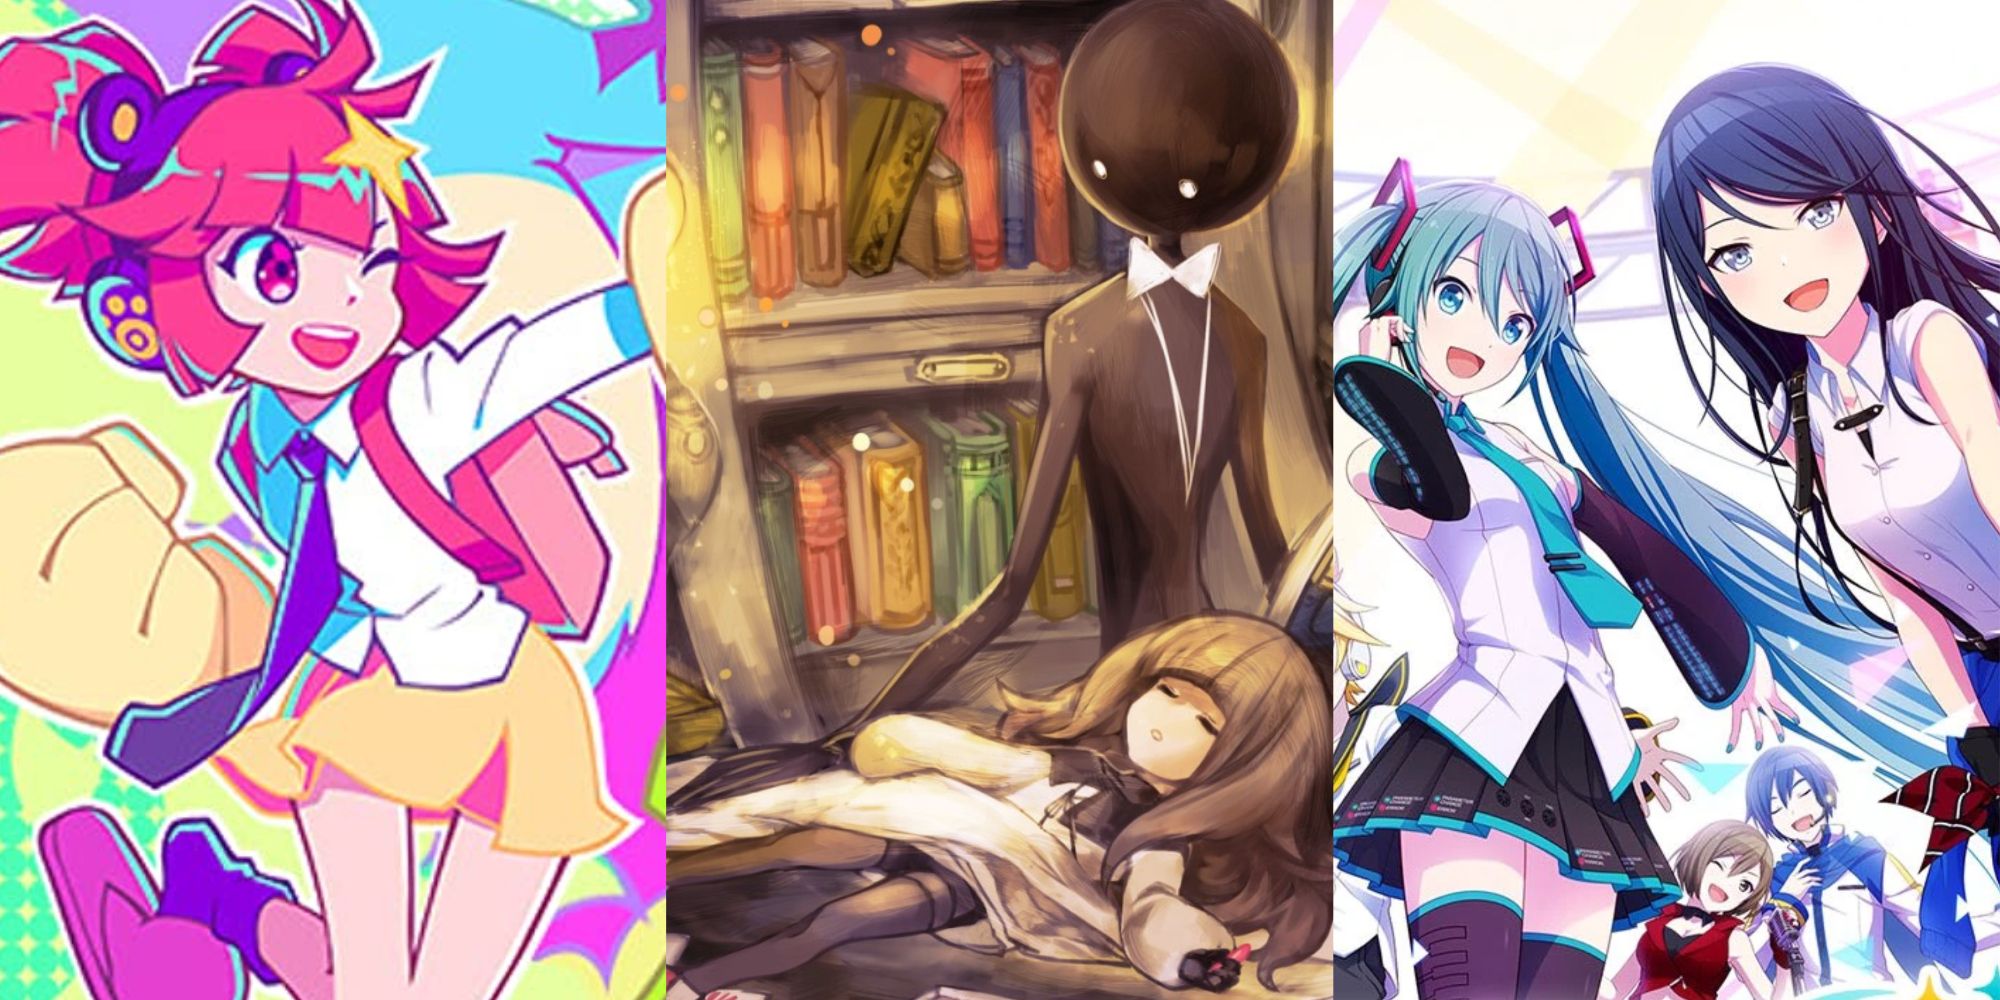 Buro from Muse Dash punching the air and winking, Alice sleeping on Deemo's lap as they look down on her from Deemo, Miku and Ichika smiling at the camera while Kaito and Meiko sing behind them